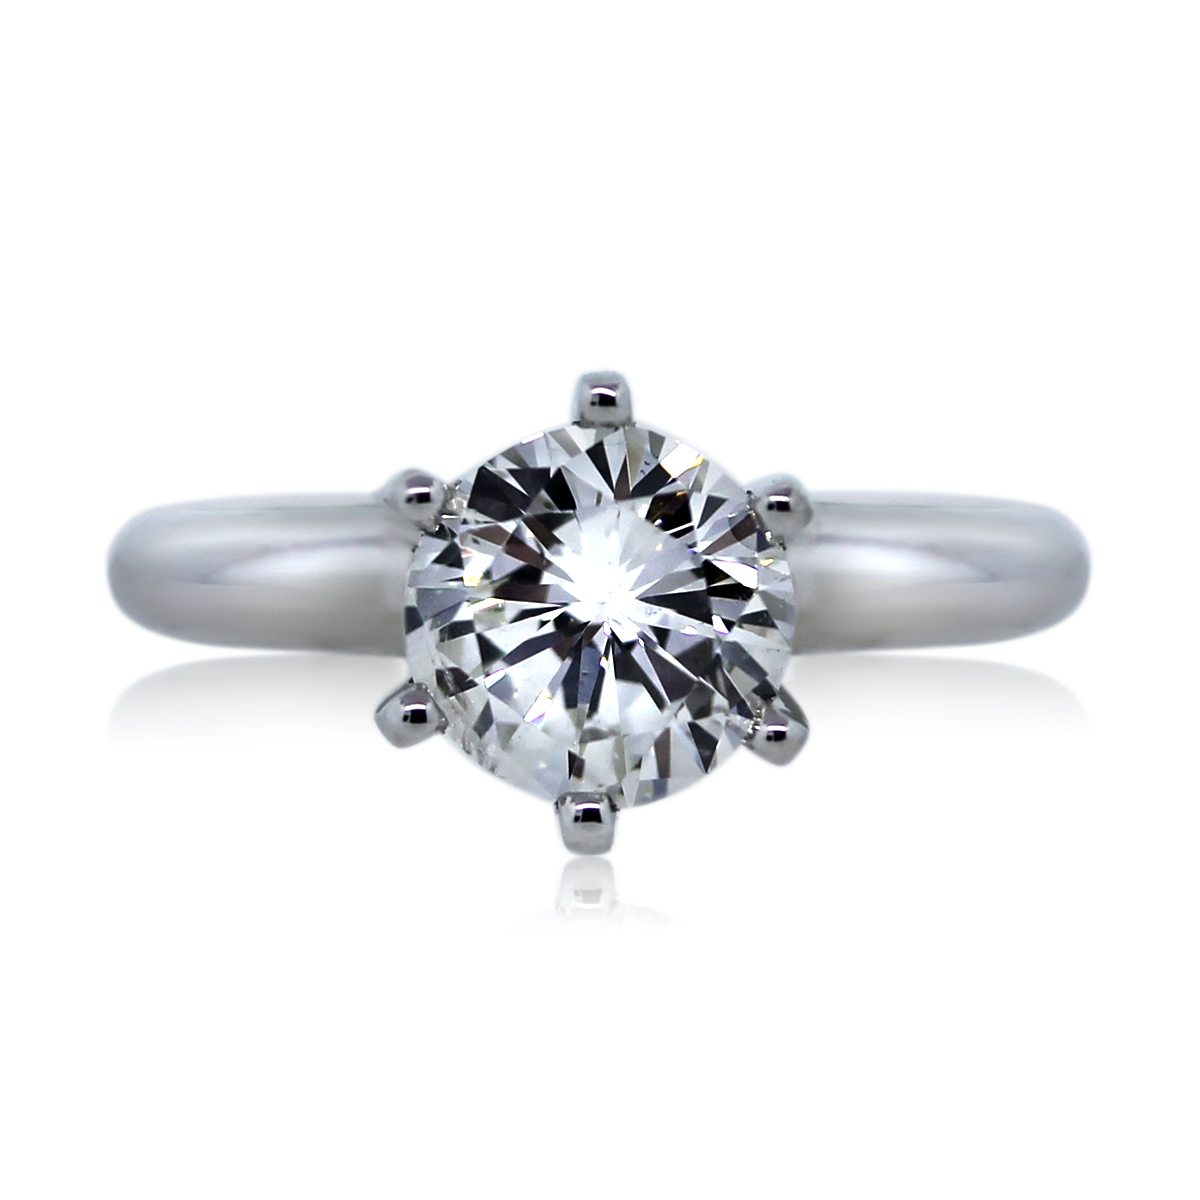 You are viewing this Round Brilliant Diamond Platinum Engagement Wedding Band Ring!